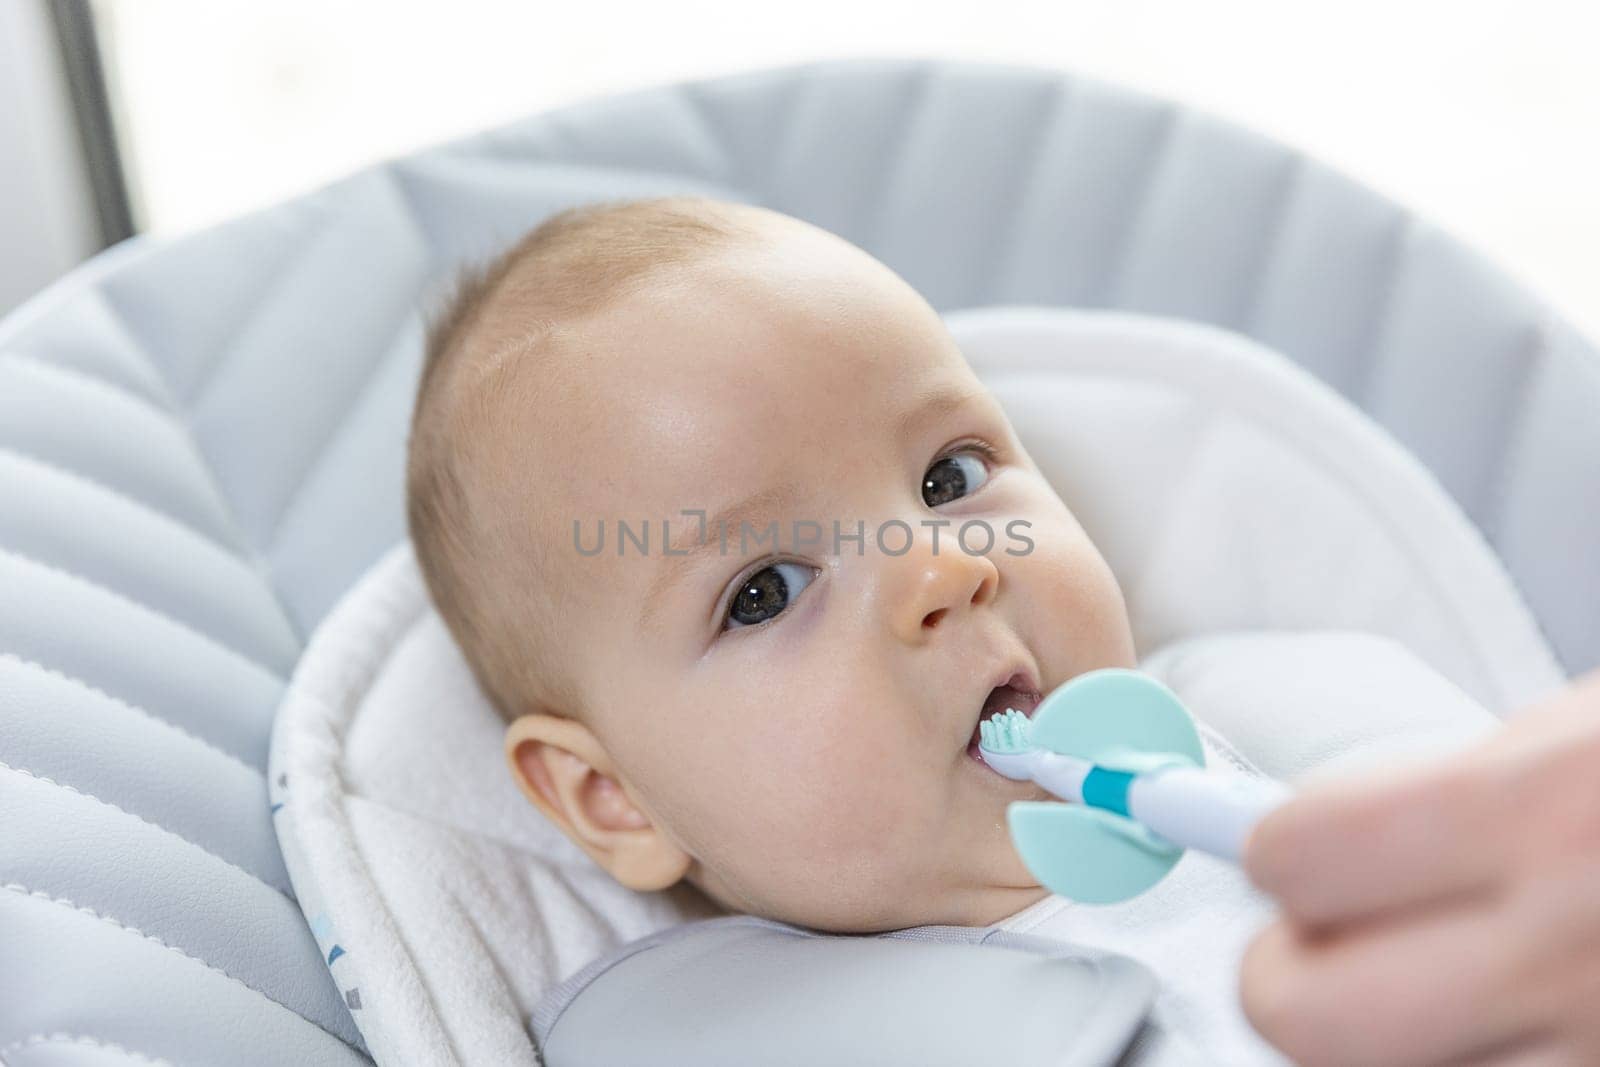 Newborn baby suffering of his tooth growth, mom using teether to ease the pain, healthcare concept